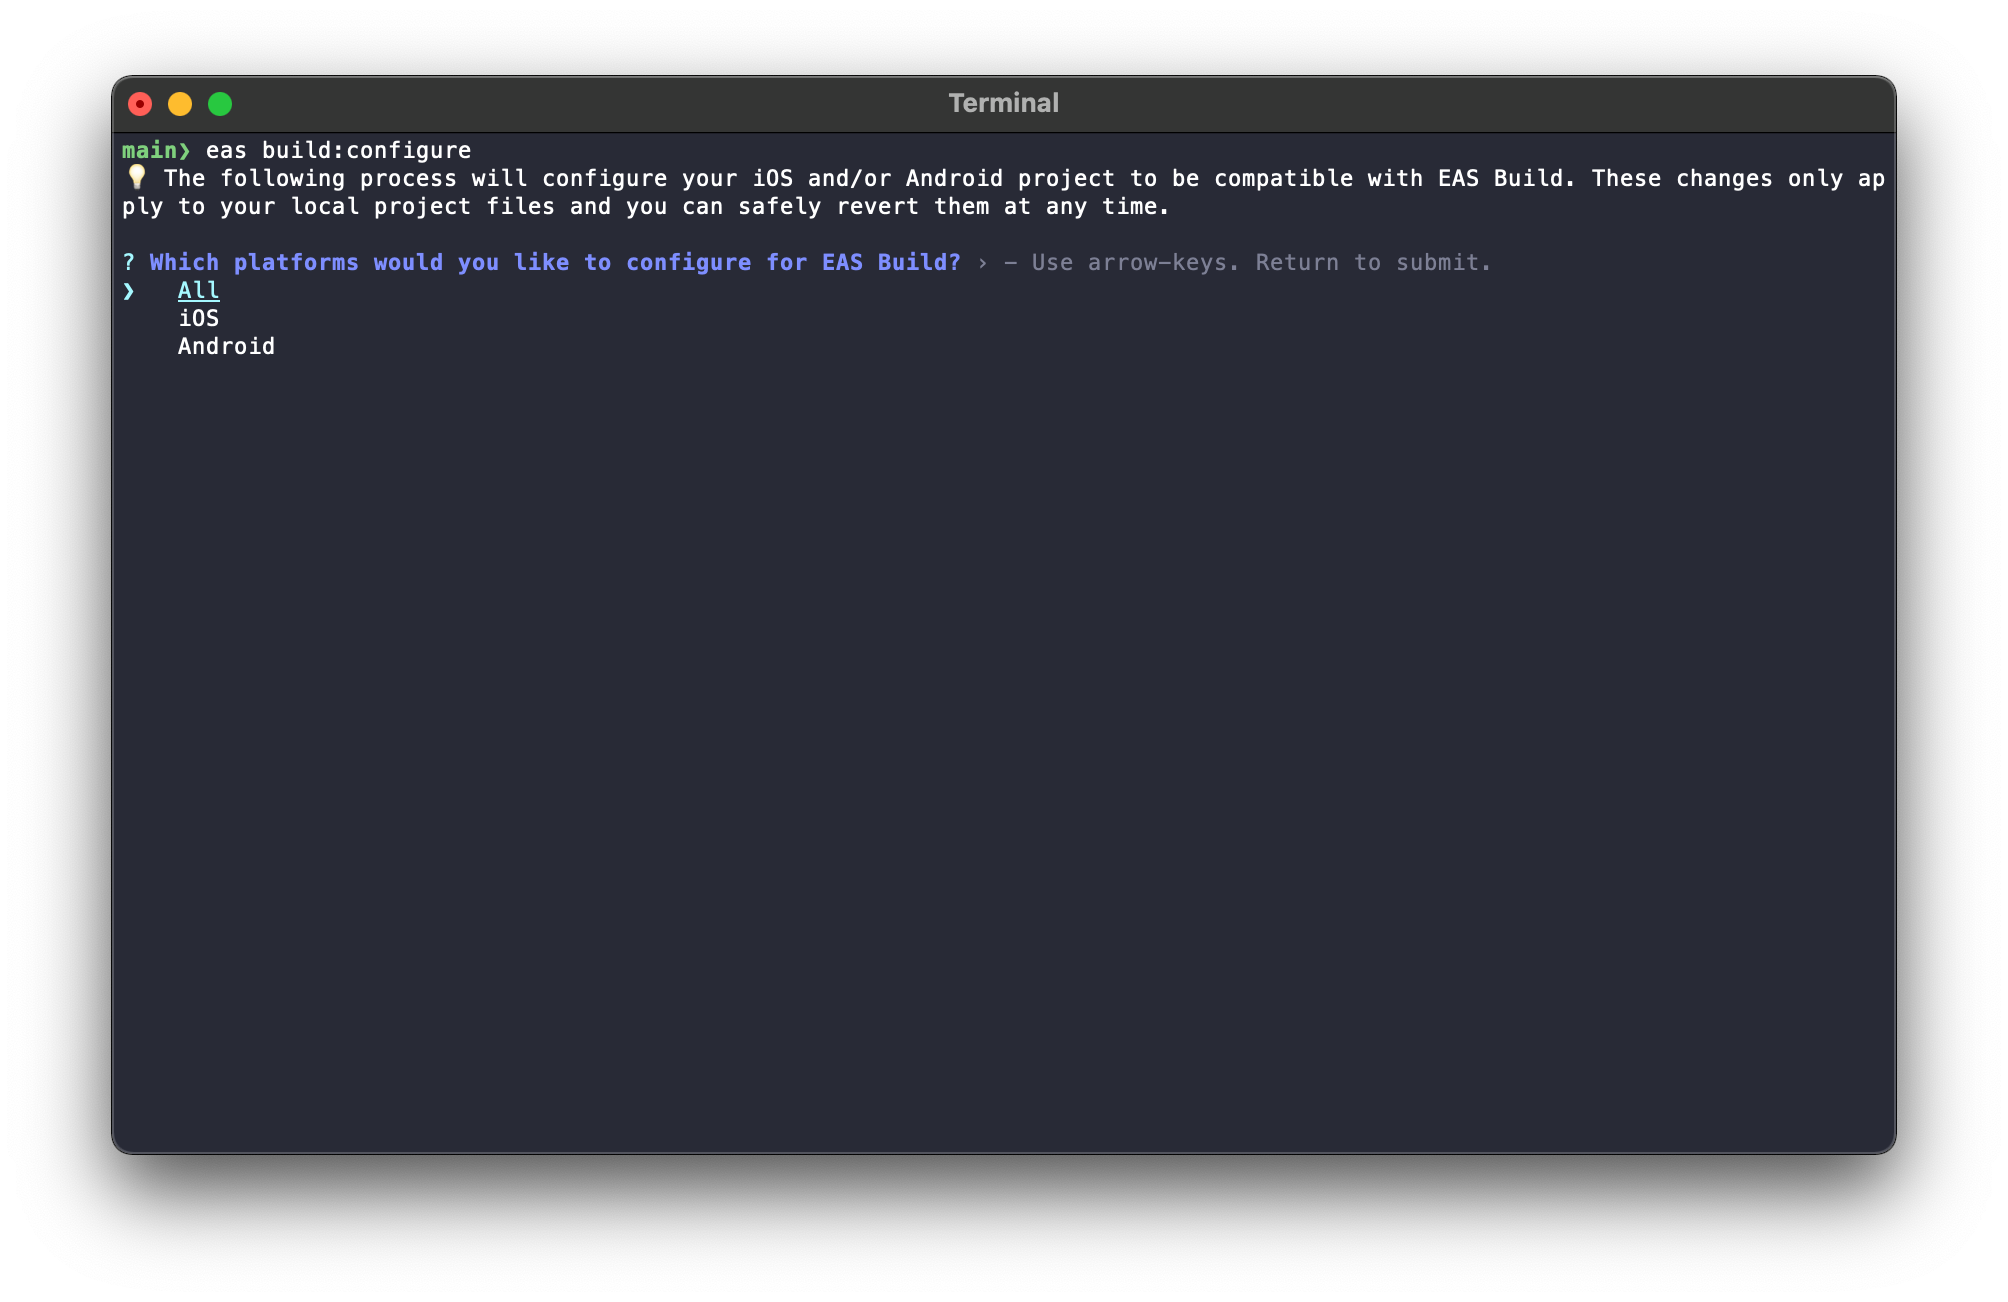 Terminal running eas build command with platform iOS and Android options available